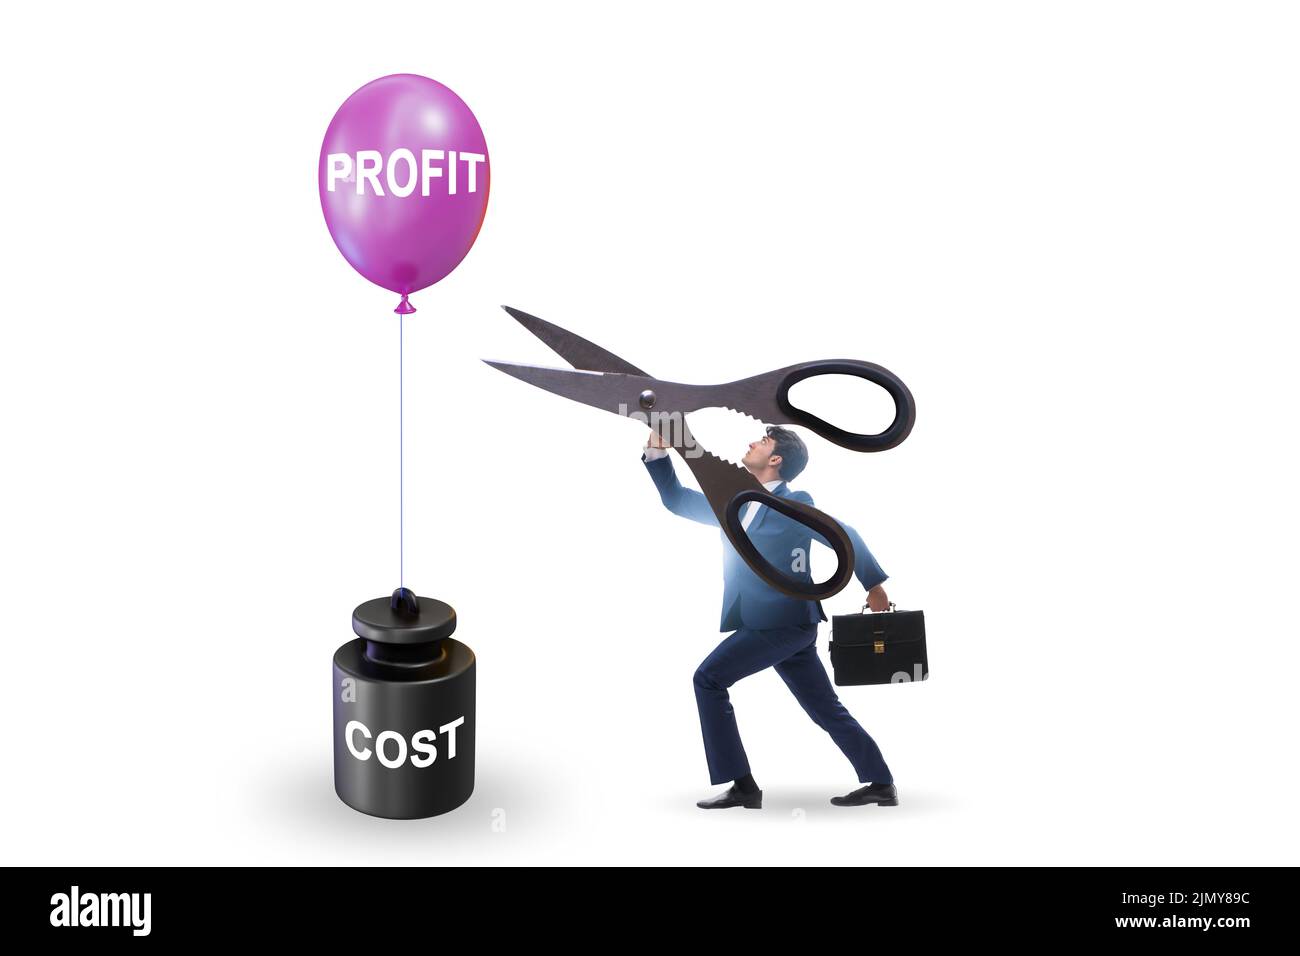 Concept of profit and cost with businessman Stock Photo